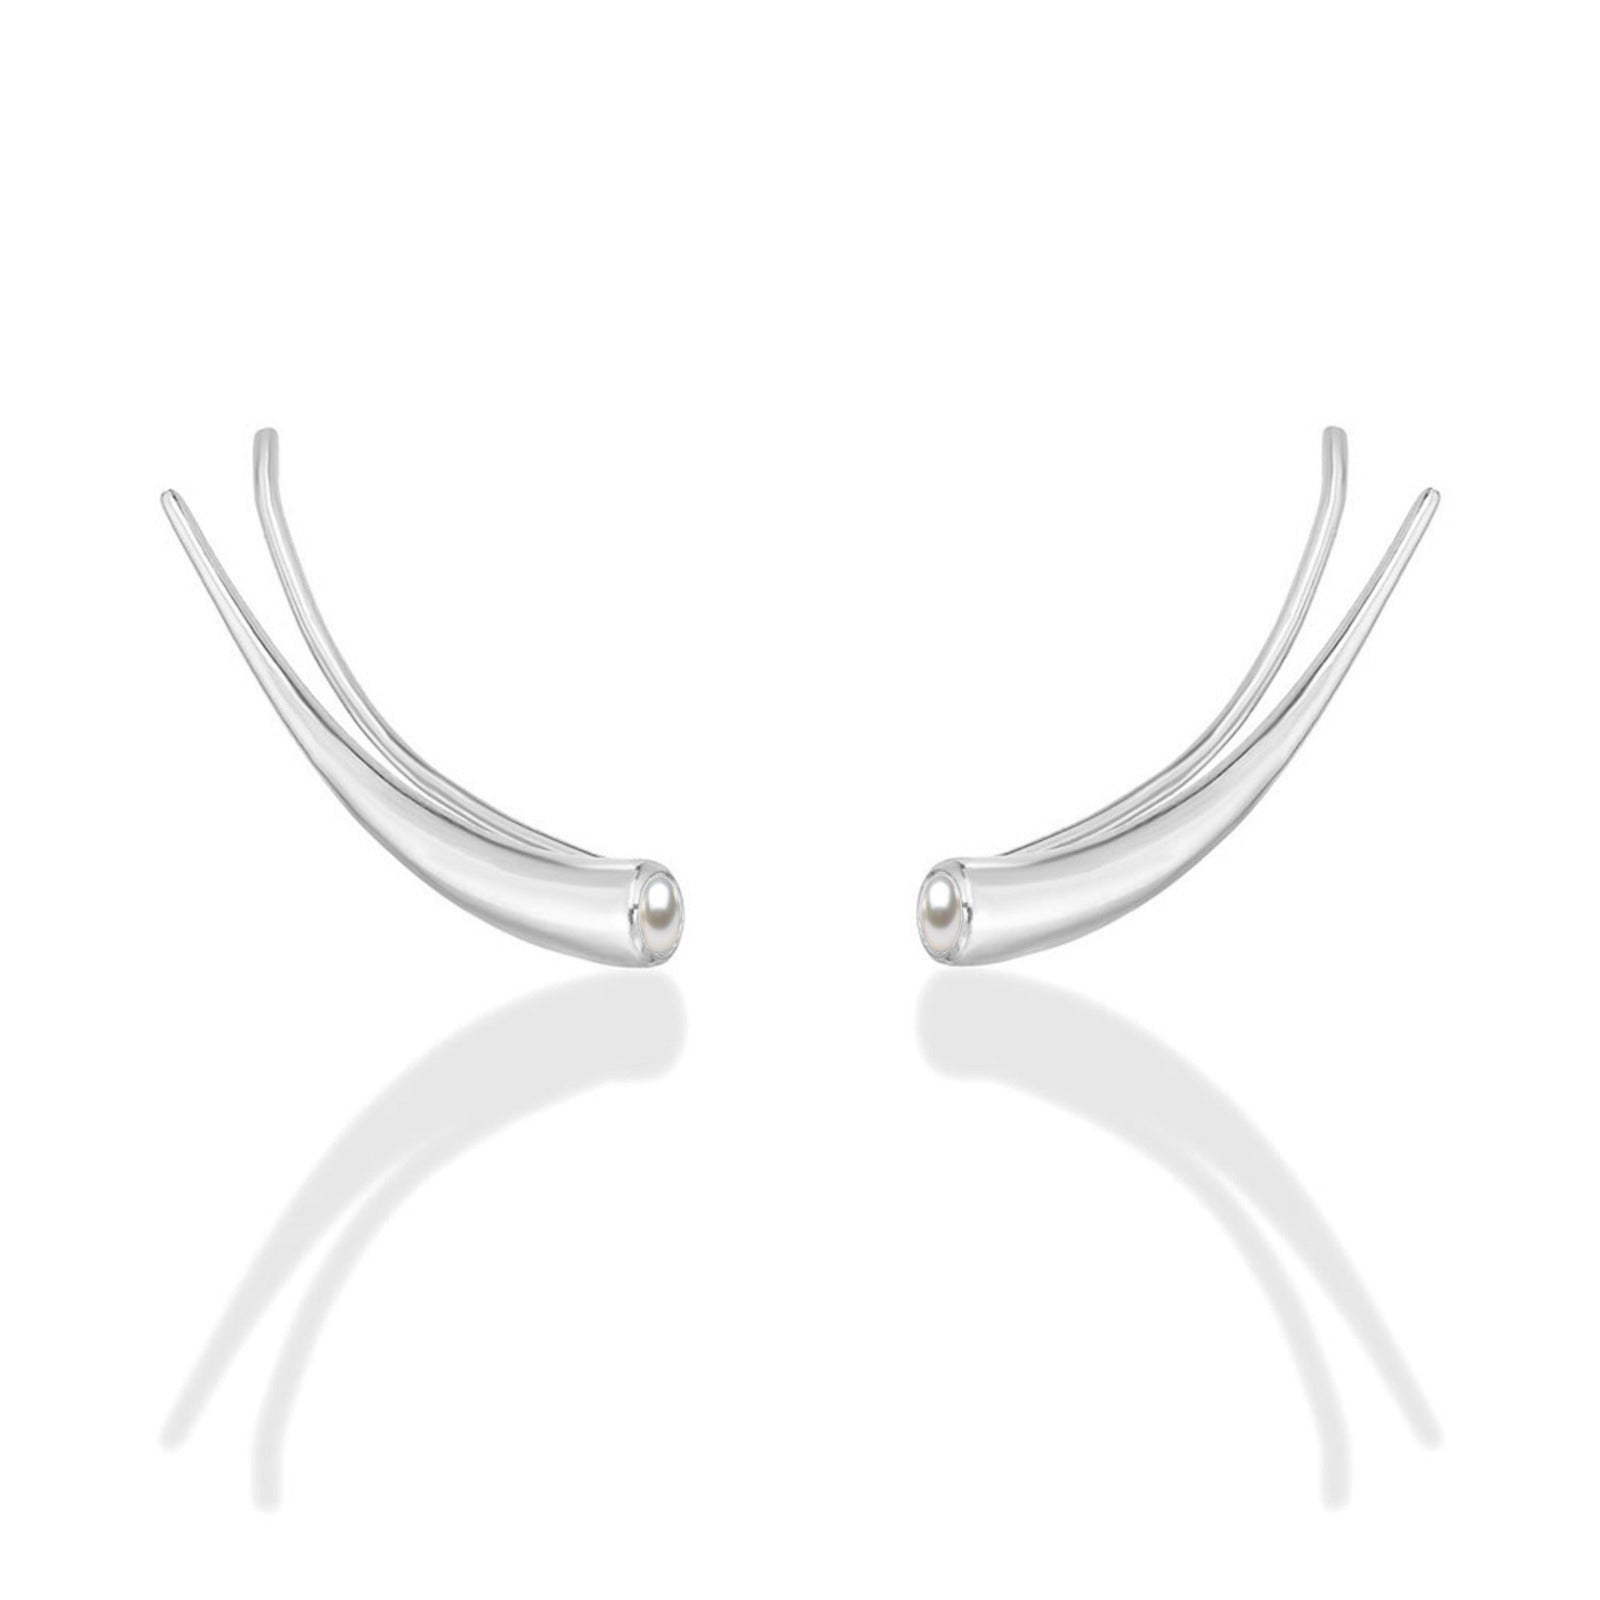 14k white gold Curved Quill Climber Earrings with pearl